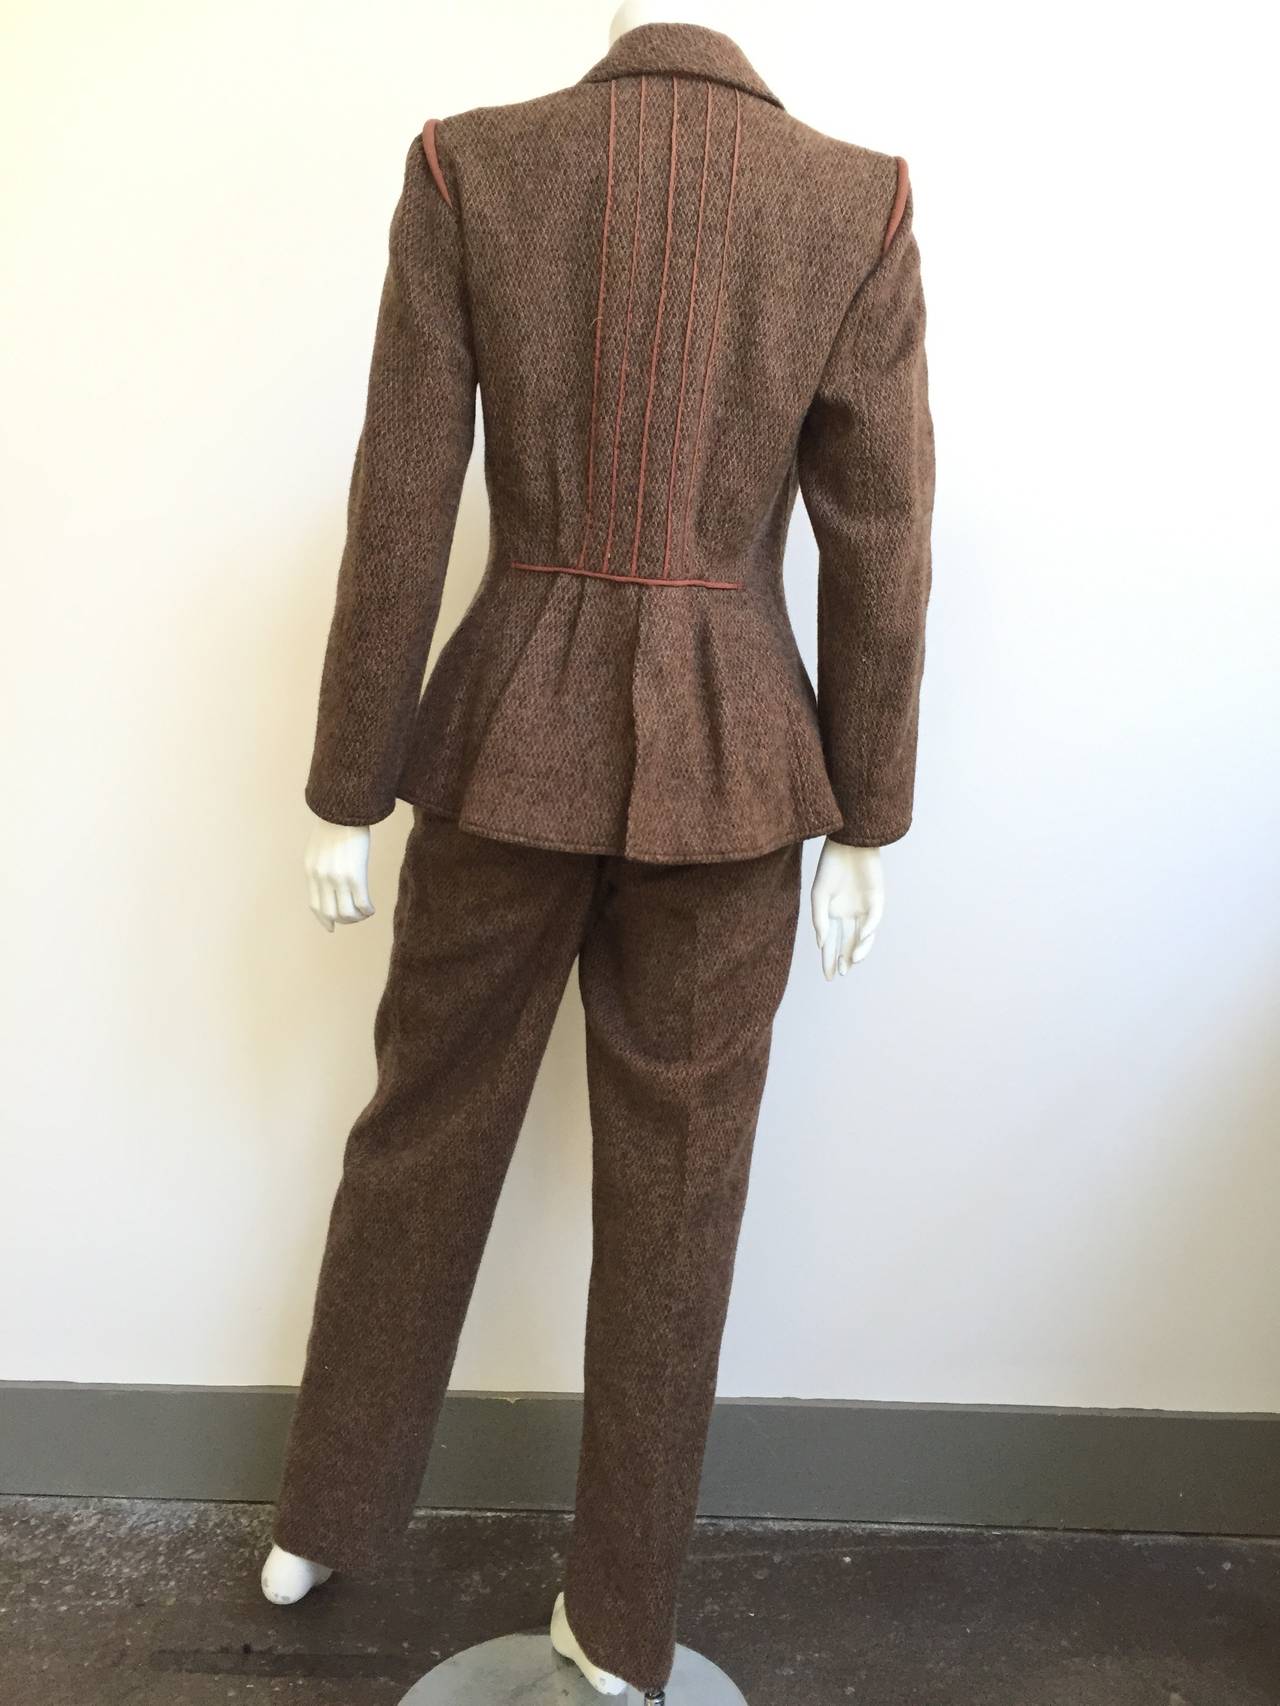 Fendi by Karl Lagerfeld 80s Suit Size 6. In Excellent Condition For Sale In Atlanta, GA